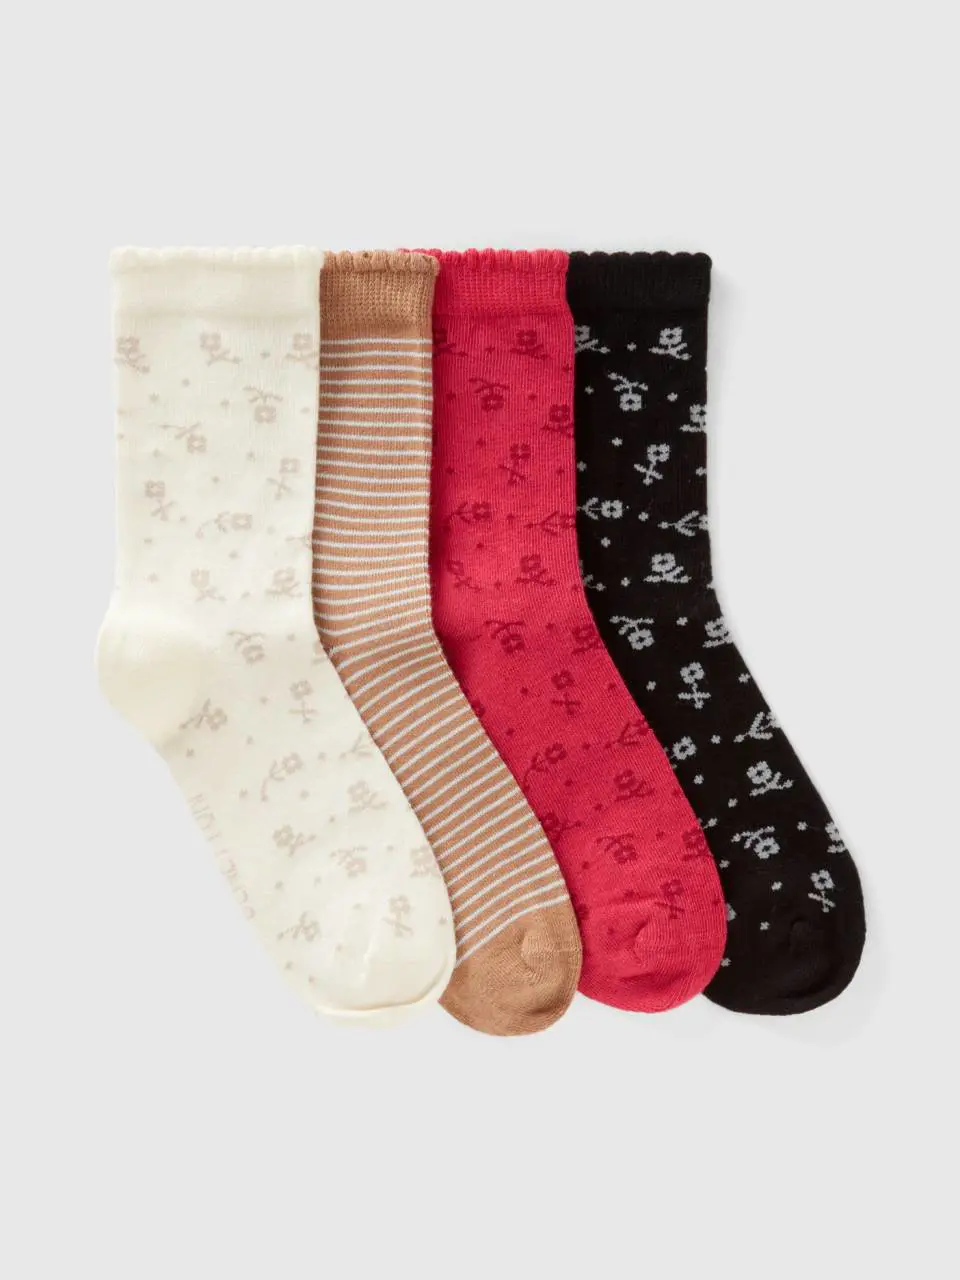 Benetton set of striped and floral jacquard socks. 1